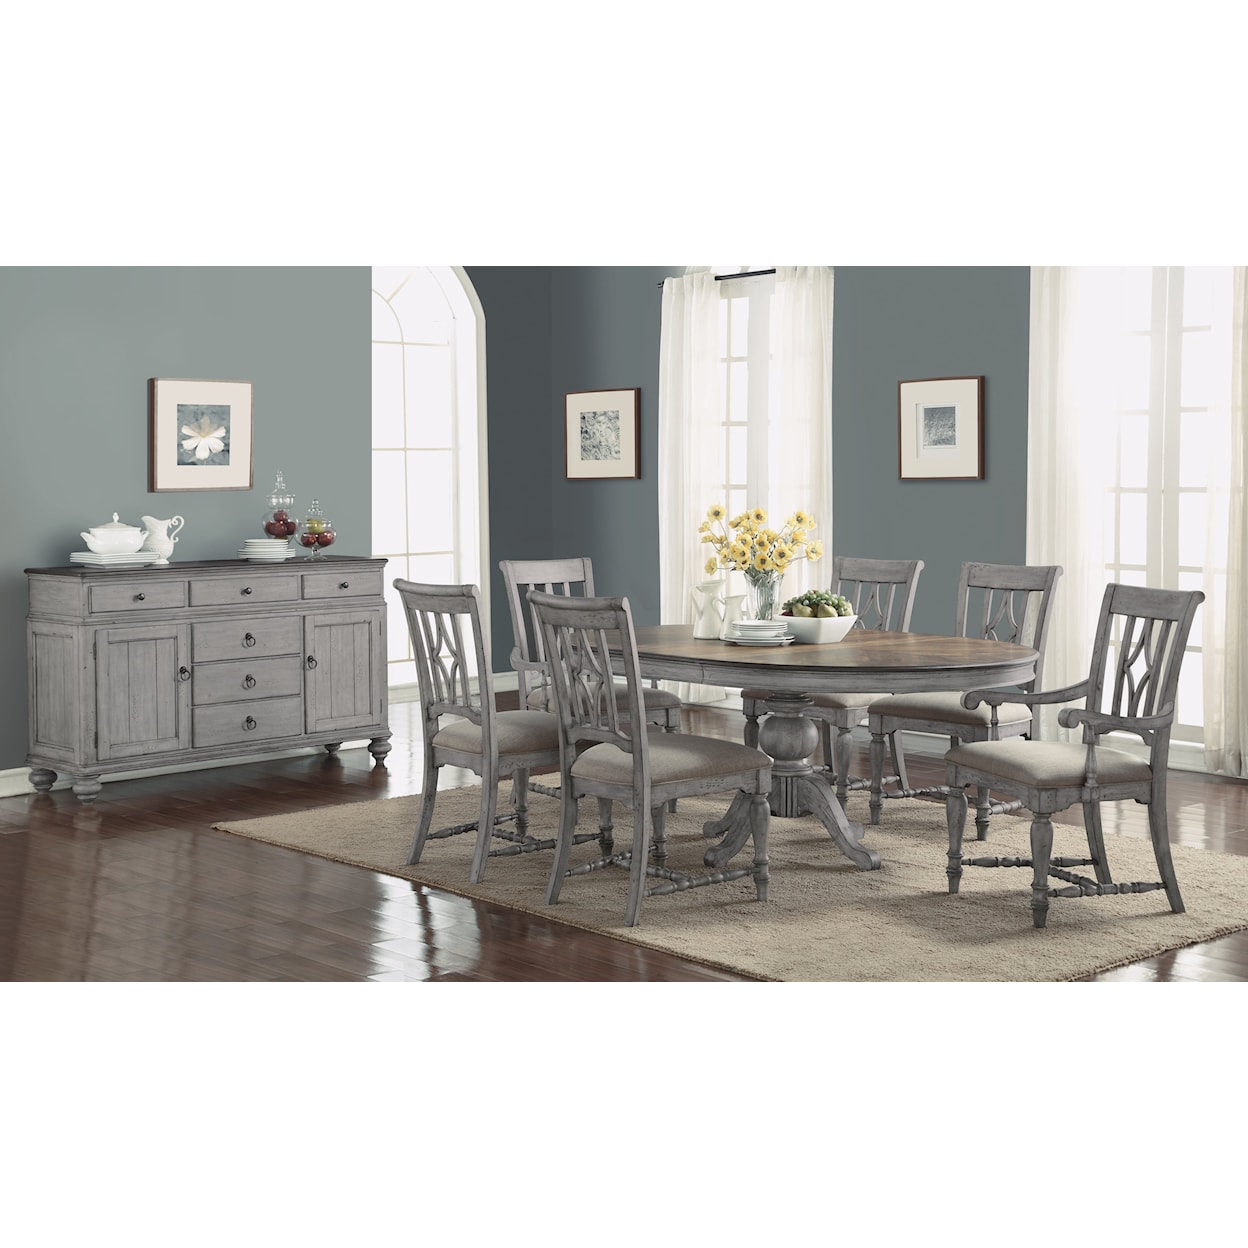 Flexsteel Wynwood Collection Plymouth Dining Room Group